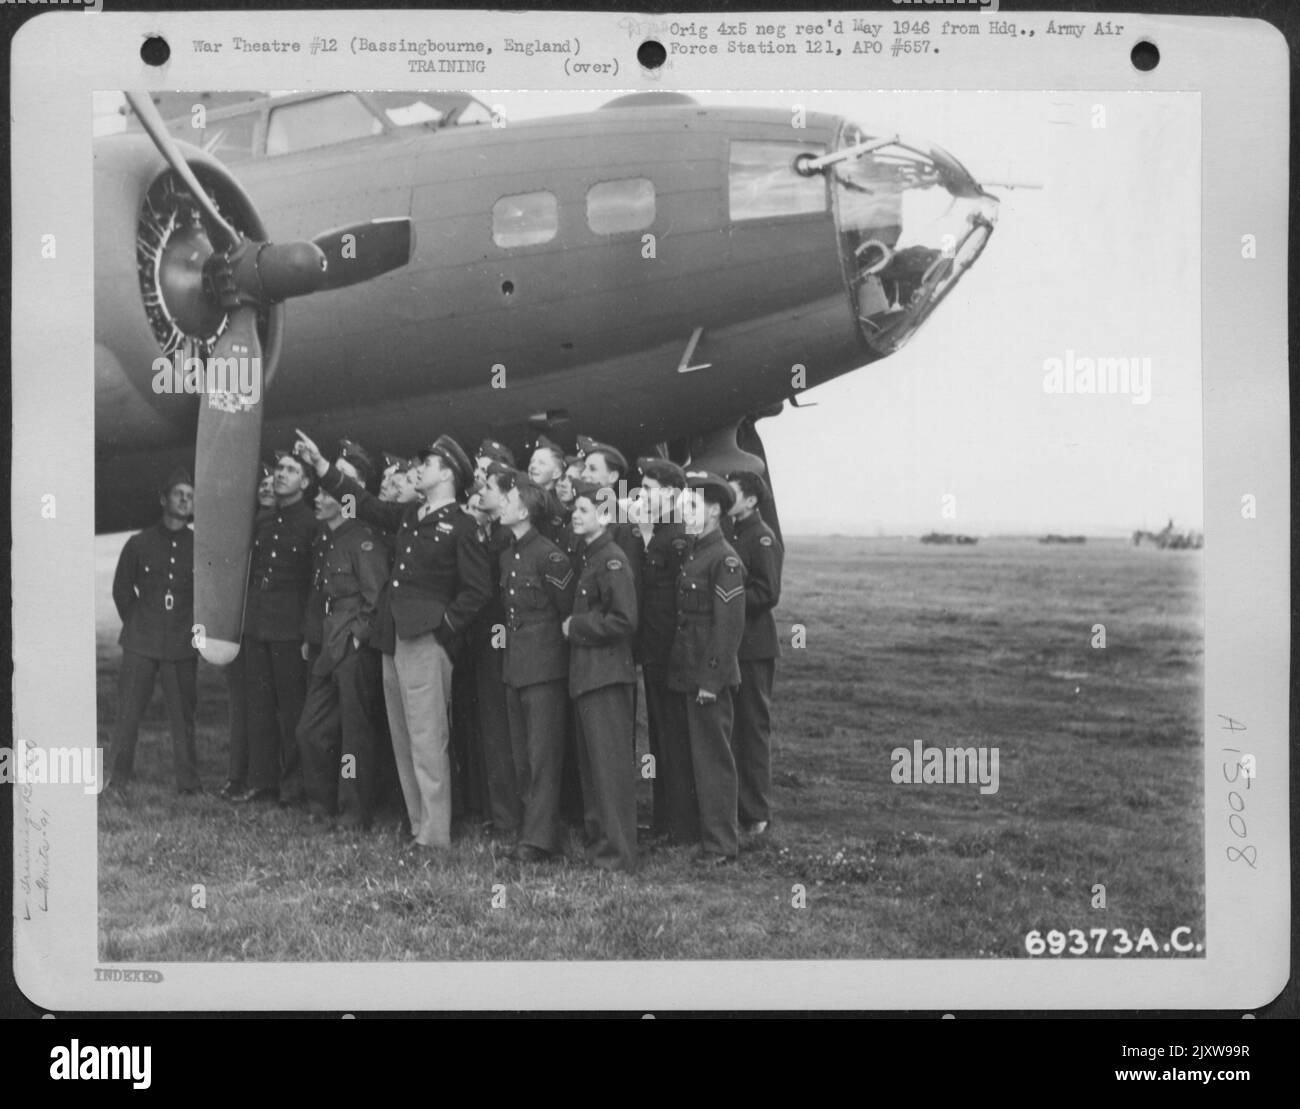 A Group Of Raf Cadets Listen Attentively As An Air Force Officer Points Out The Features Of A Boeing B-17 'Flying Fortress' At The 91St Bomb Group Base In Bassingbourne, England. 16 June 1943. Stock Photo